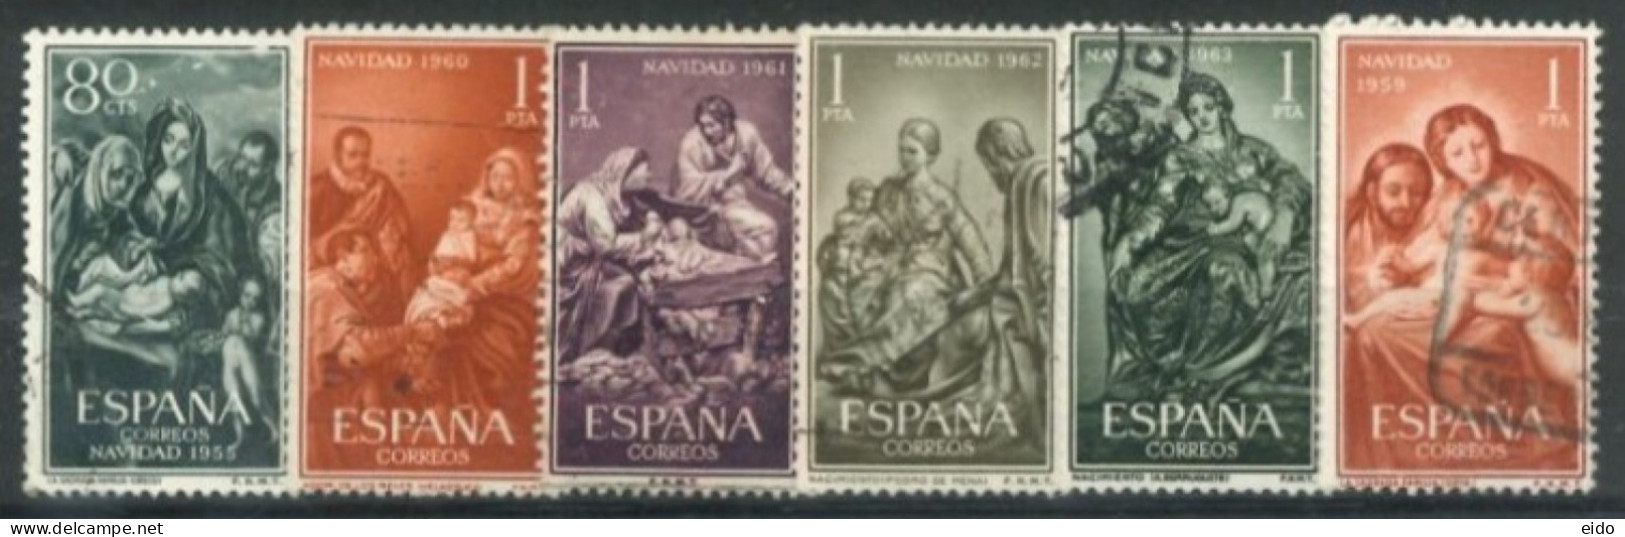 SPAIN, 1955/63, HOLY FAMILY STAMPS SET OF 6, USED. - Oblitérés